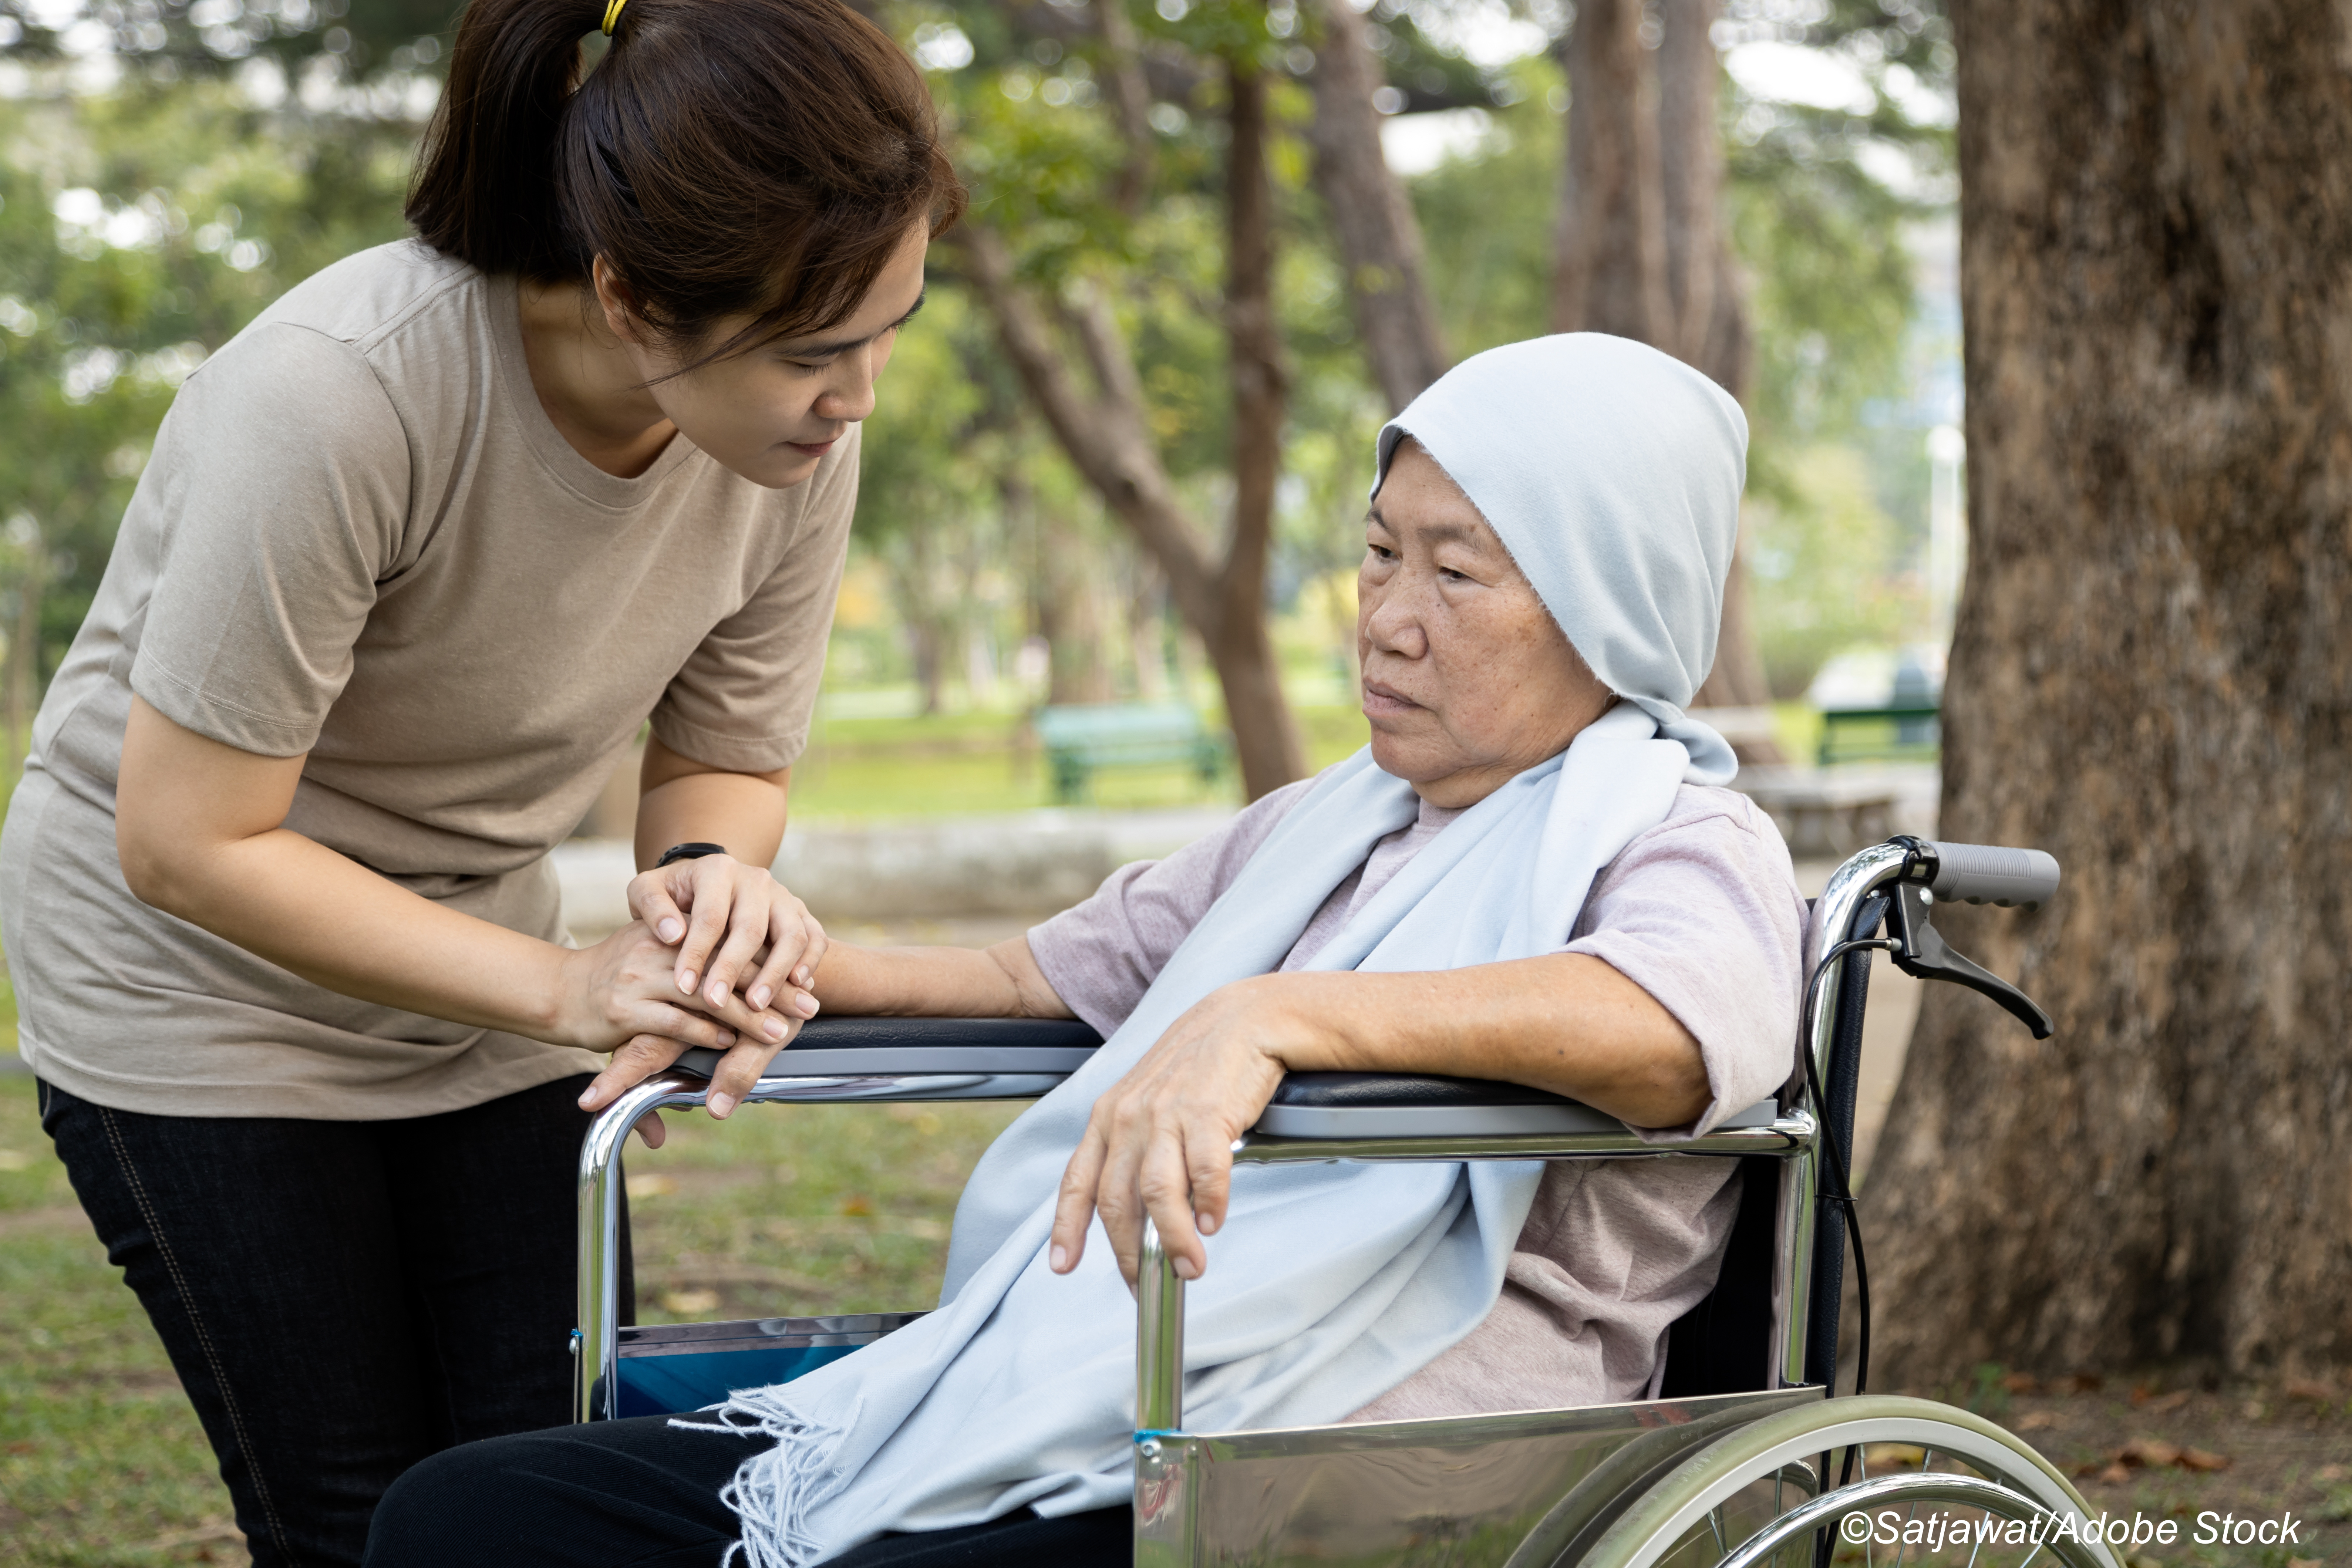 Caregivers Should Be Factored into 
AD Cost-Effectiveness Equation